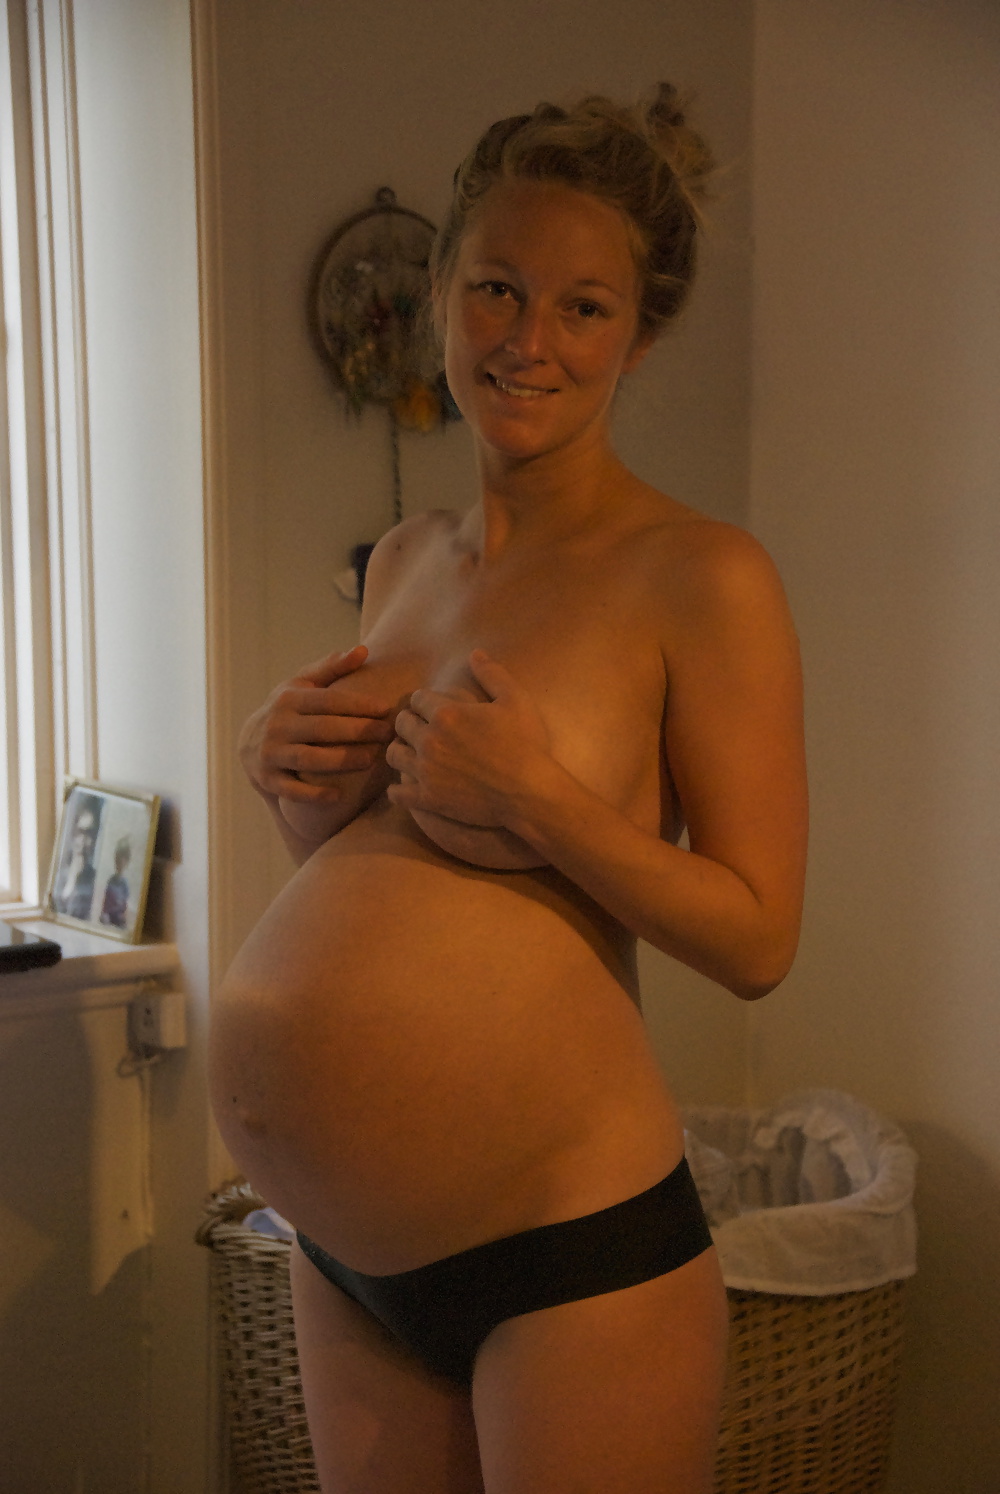 Pregnant amateur private colection...if you know her adult photos